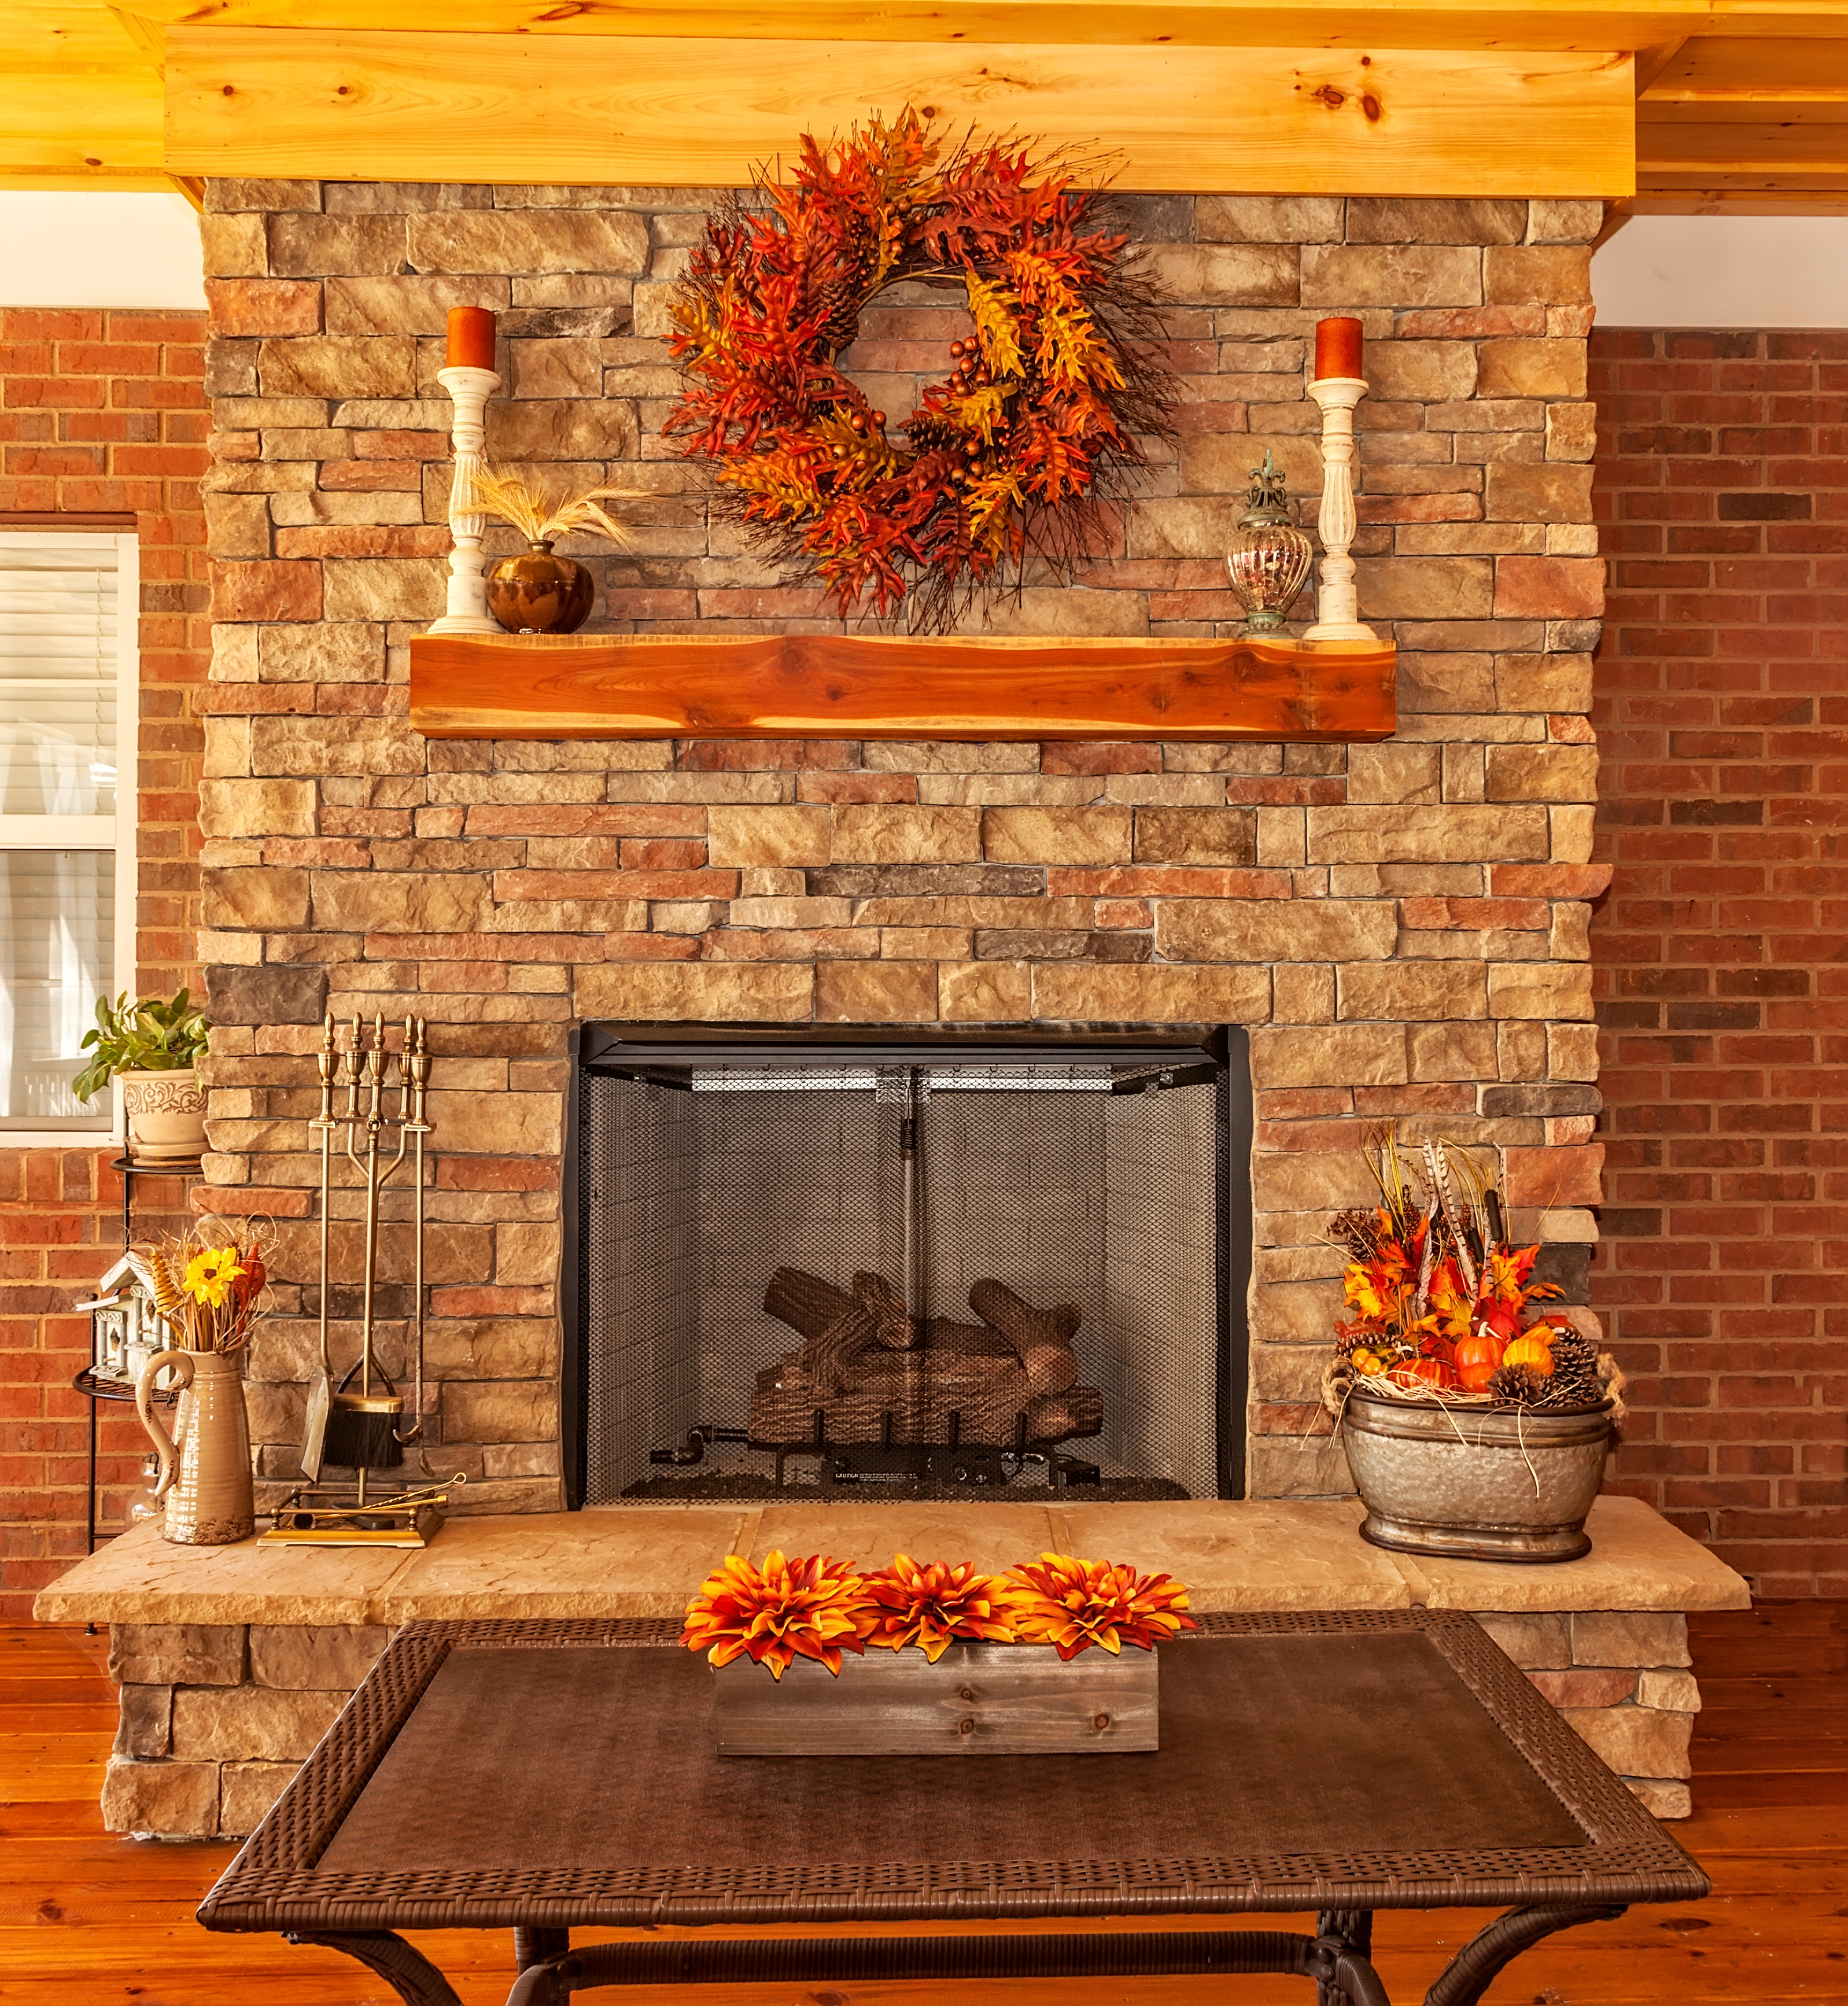 5 Fall Mantel Decorating Ideas That'll Make You Look Like a Pro 79